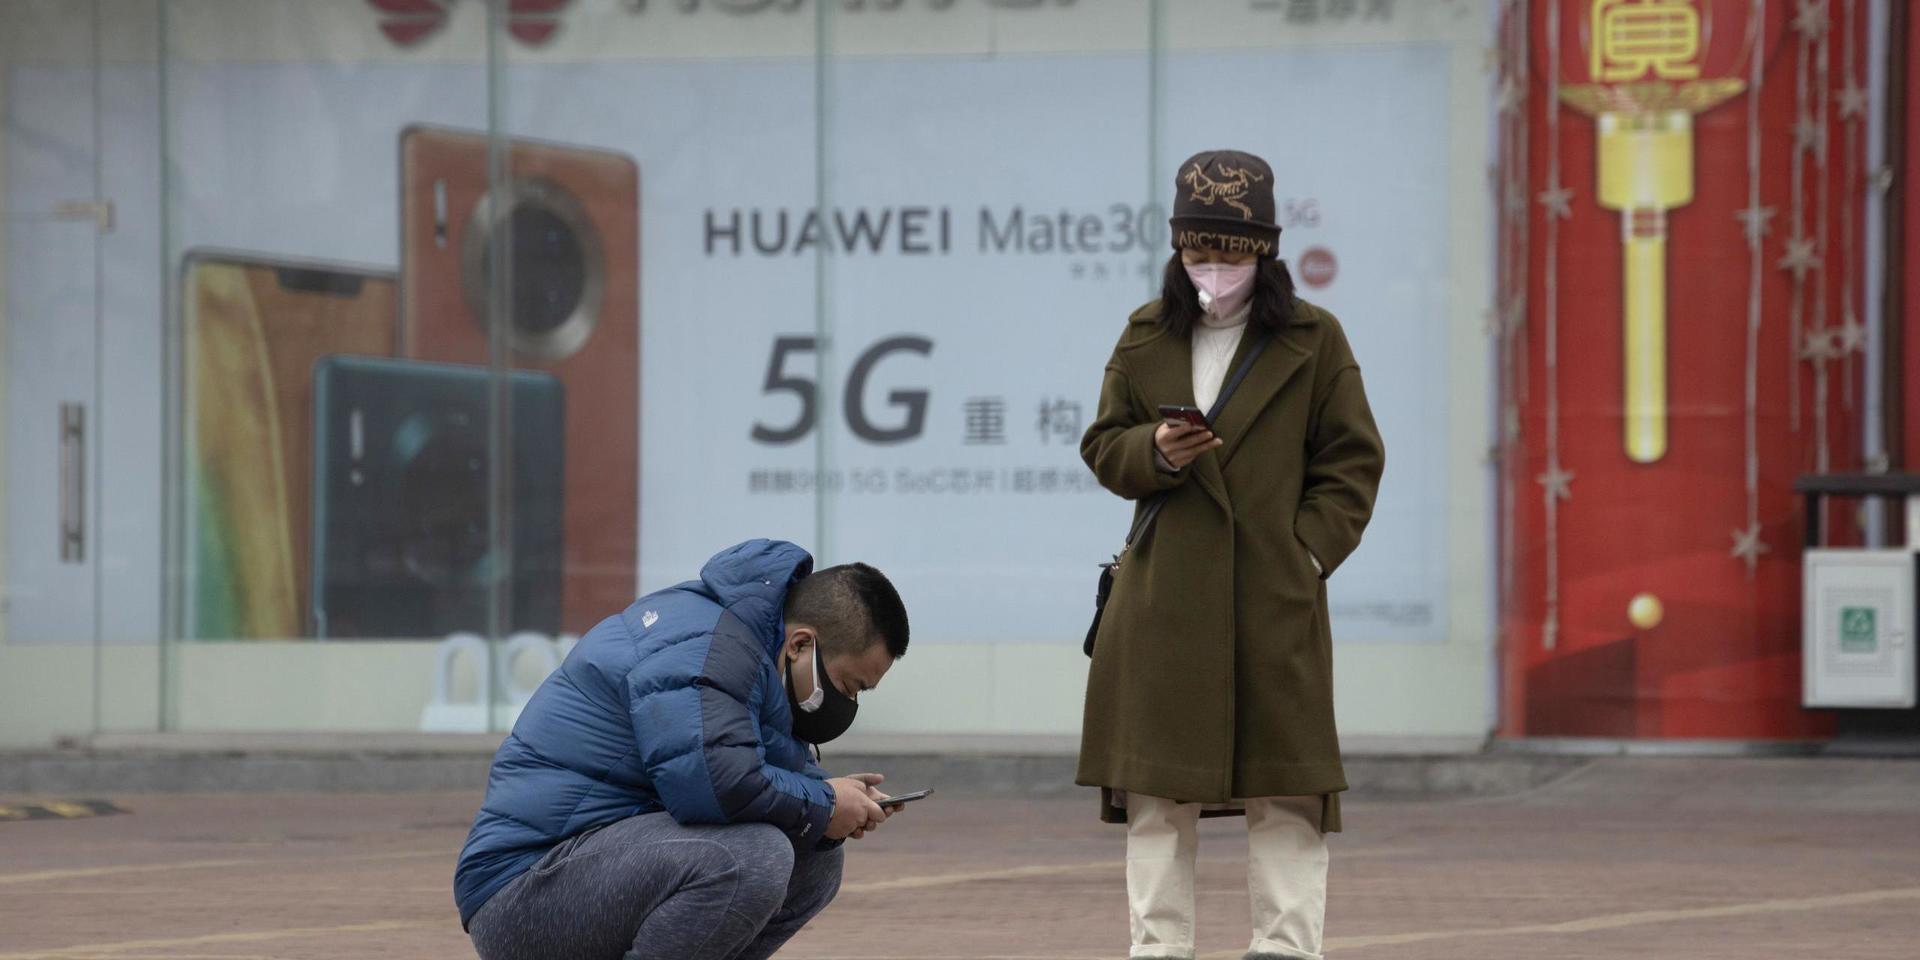 In this Sunday, March 8, 2020, photo, residents wearing masks look at their smartphones near an advertisement for 5G smartphones from Chinese tech giant Huawei in Beijing. Factories in China, struggling to reopen after the coronavirus shut down the economy, face a new threat from U.S. anti-disease controls that might disrupt the flow of microchips and other components they need. For most people, the new coronavirus causes only mild or moderate symptoms. For some it can cause more severe illness. (AP Photo/Ng Han Guan)  XHG102